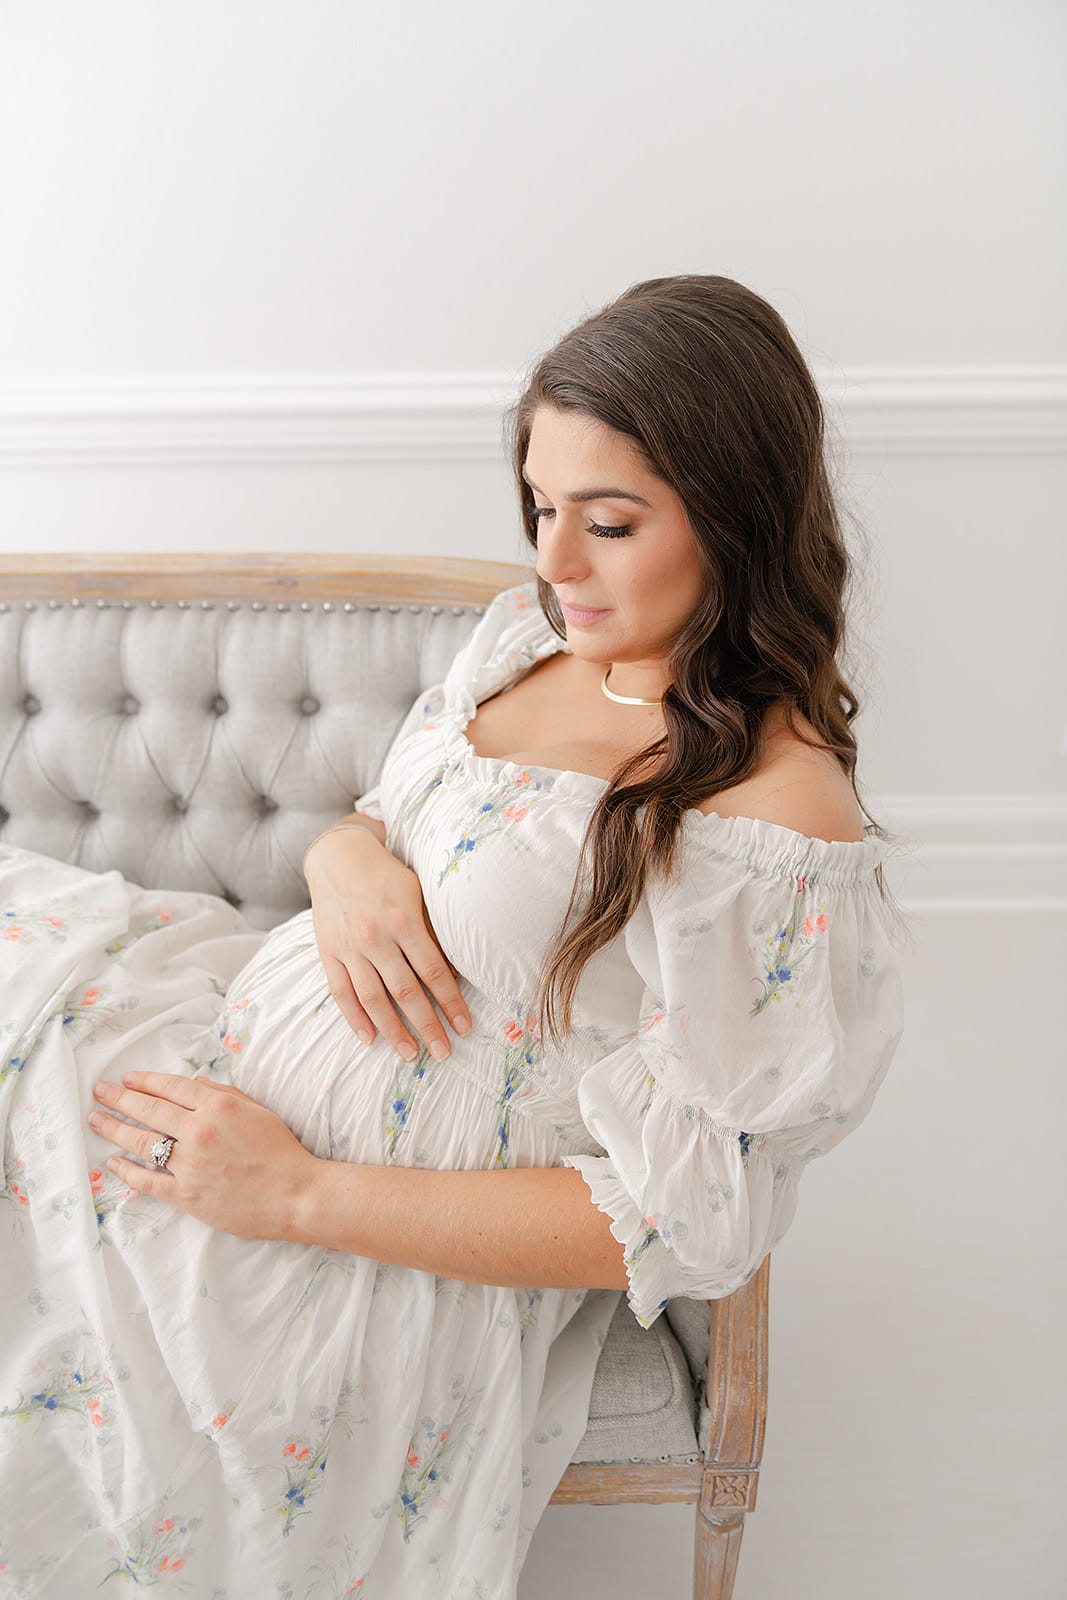 A pregnant woman in a floral dress, sitting on a gray couch.